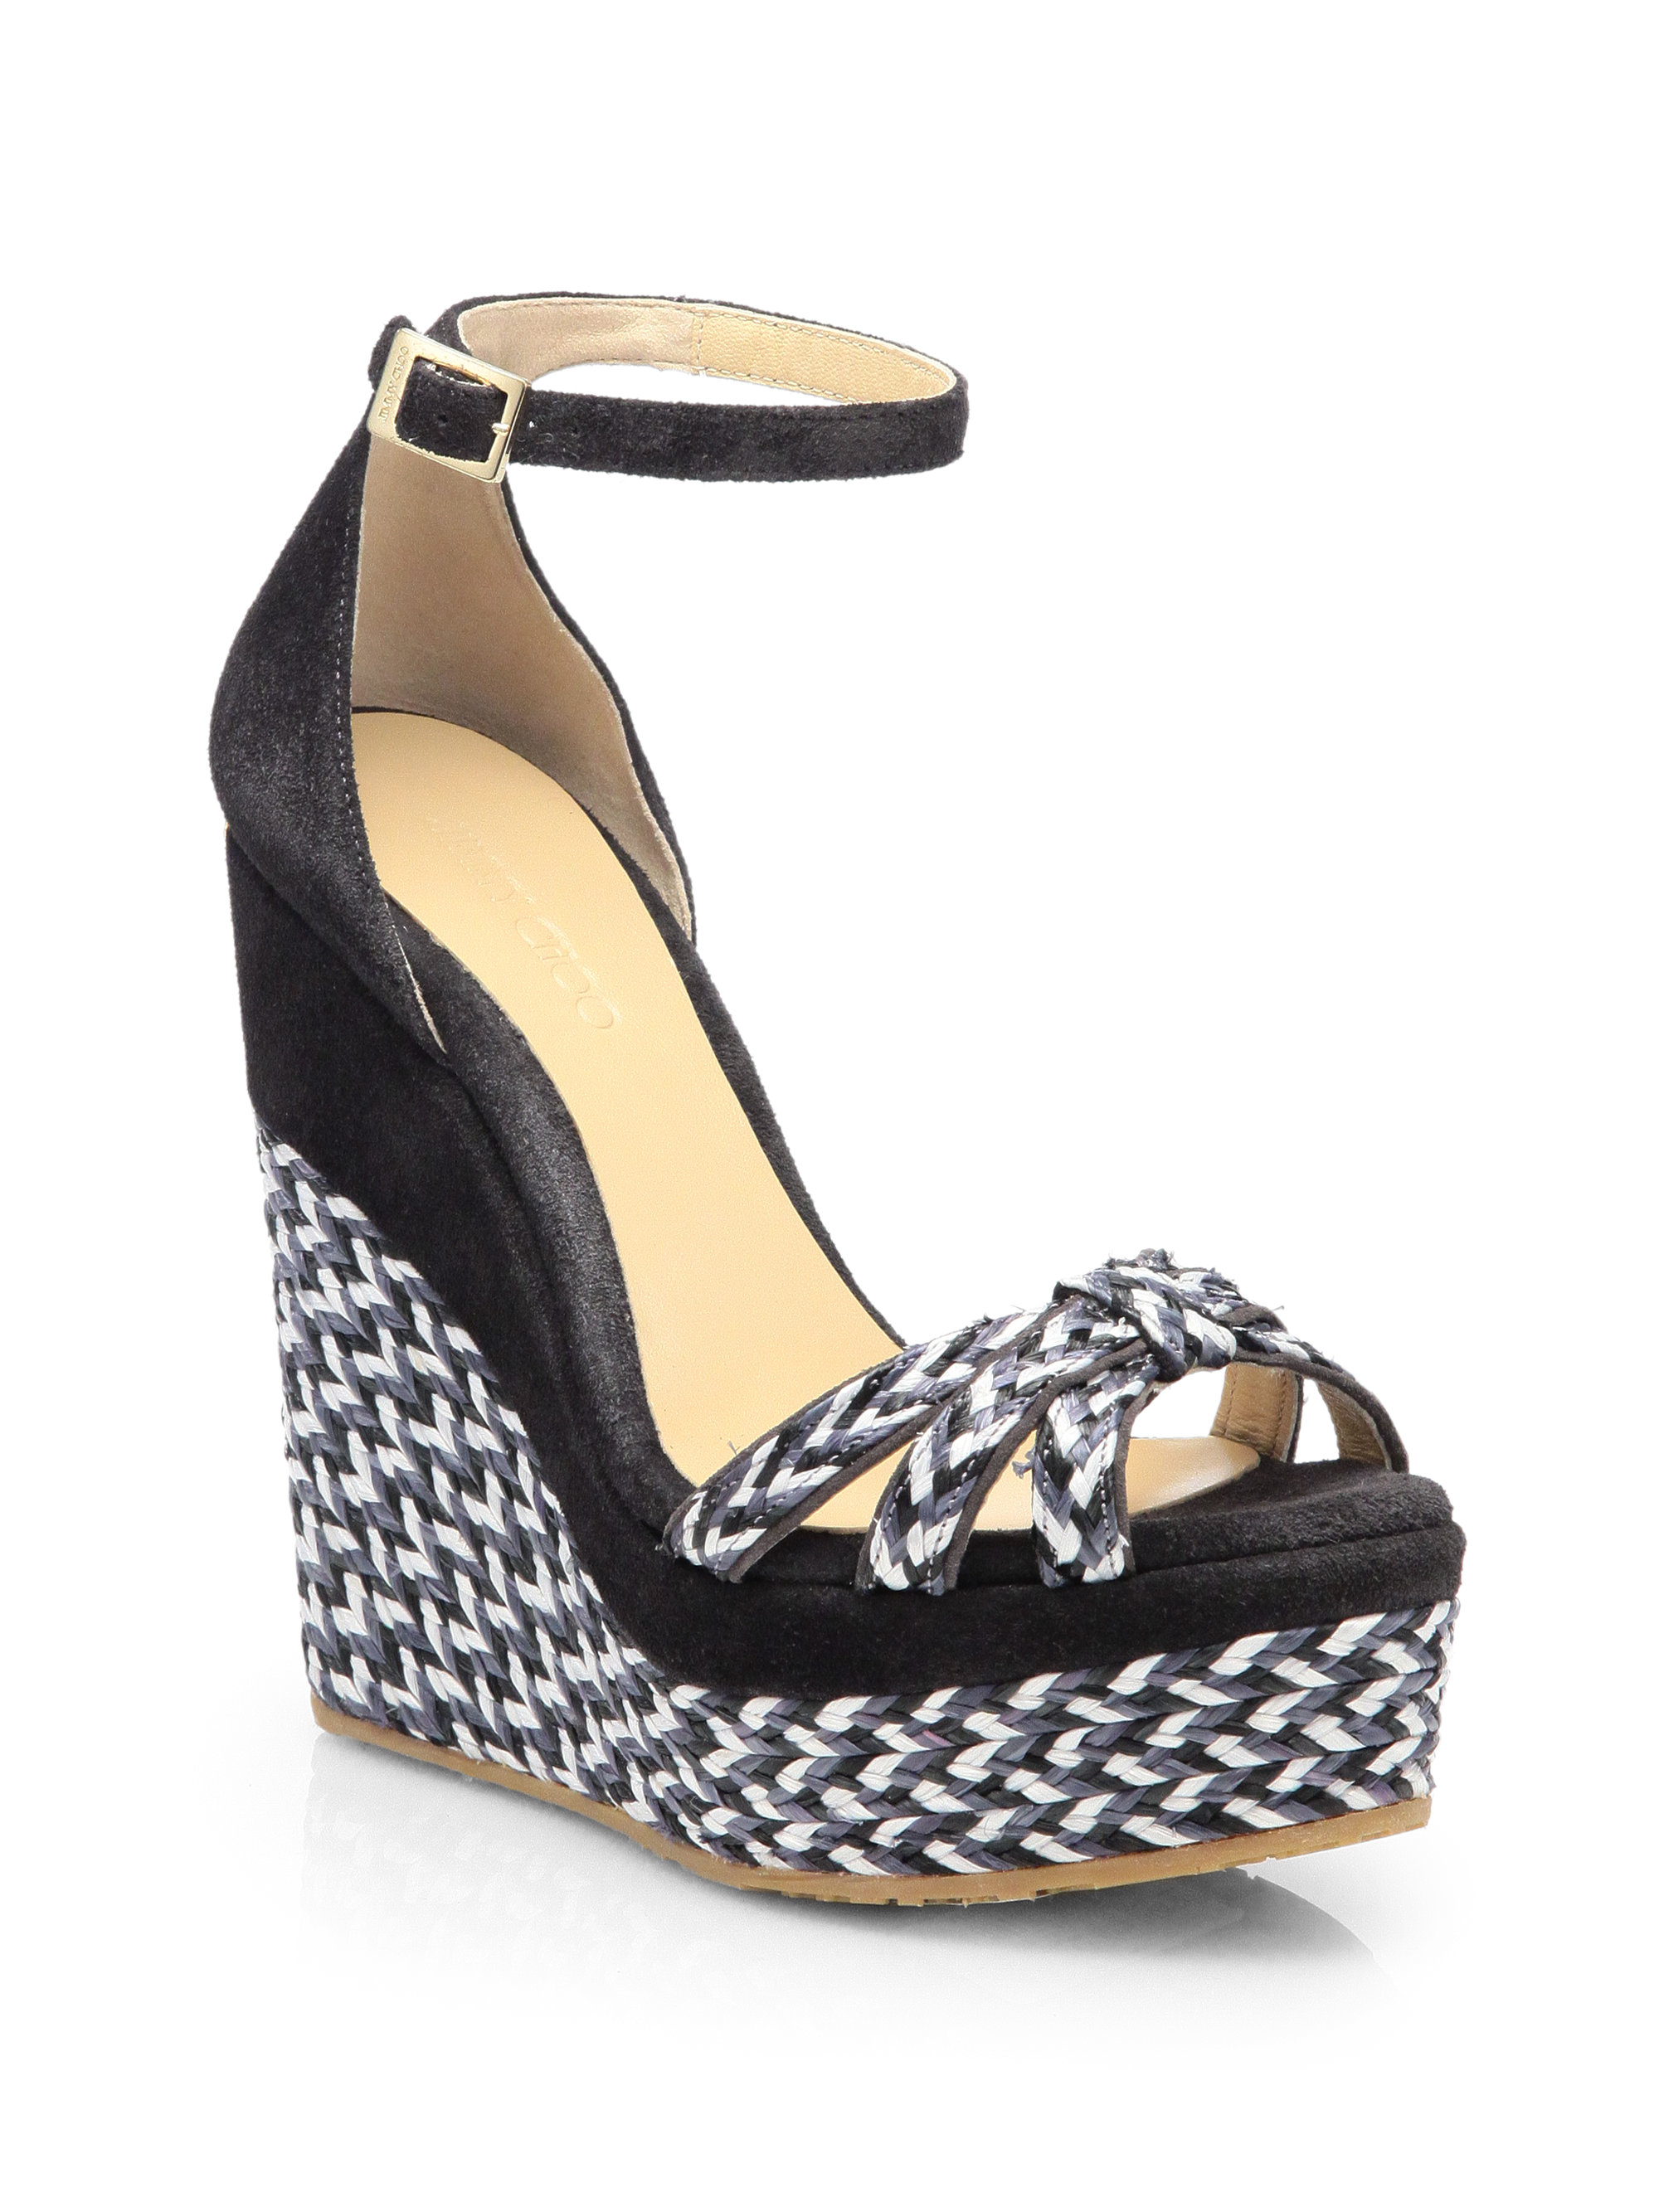 Jimmy choo Promise Suede Woven Espadrille Wedge Sandals in Black | Lyst